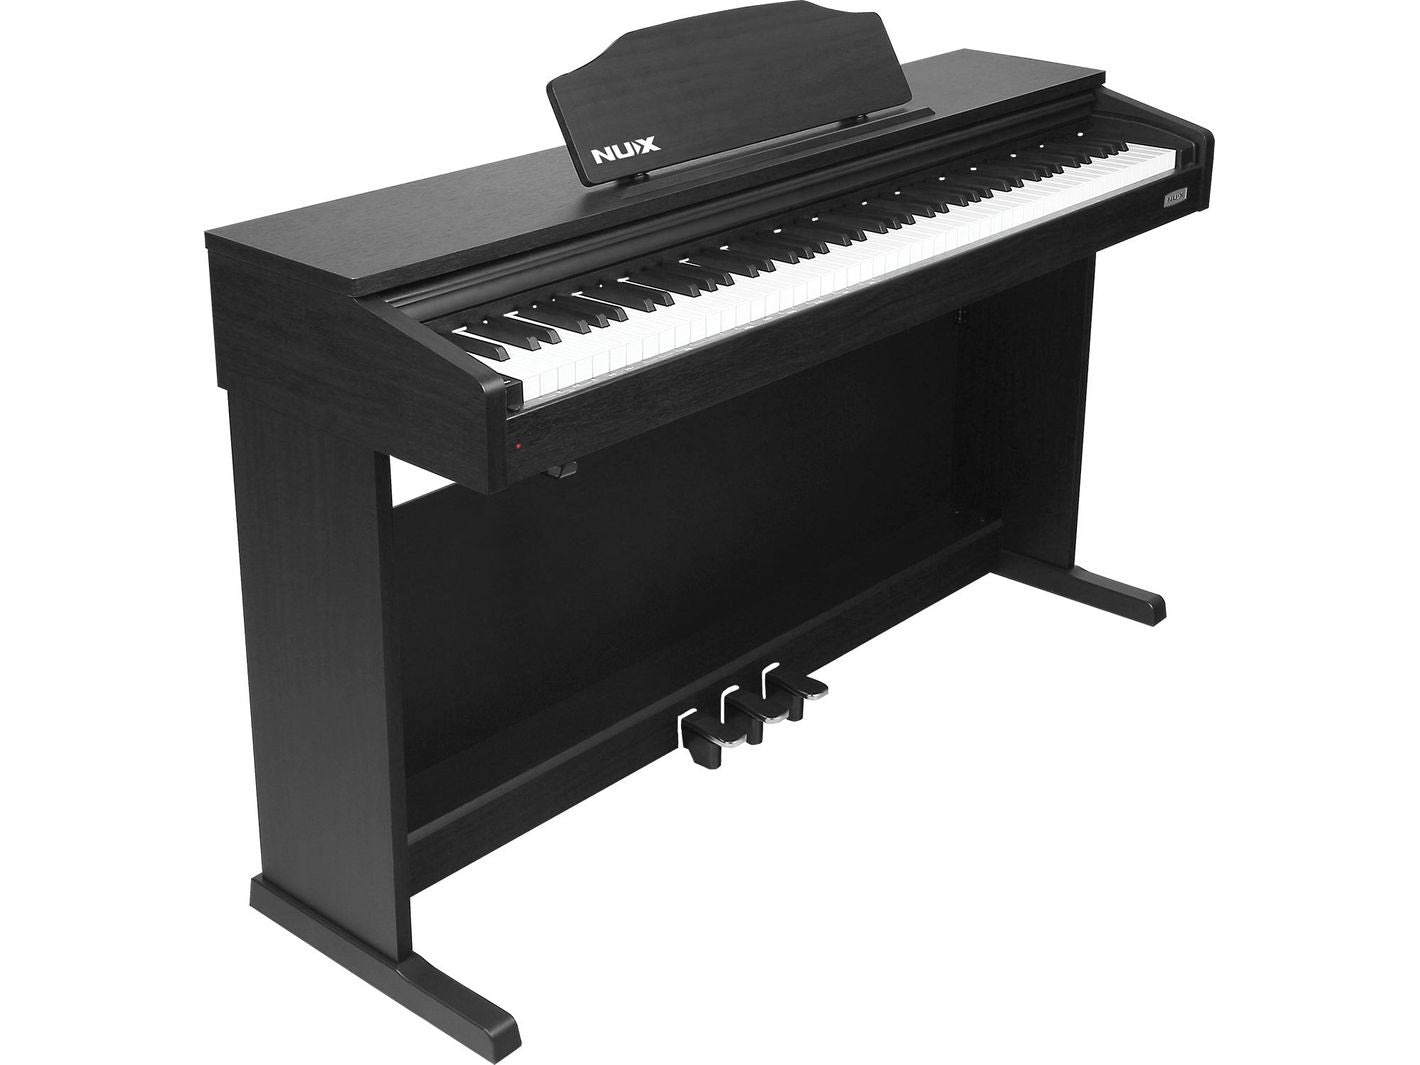 Nux WK-400 Digital 88 Fully Weighted Grand Piano